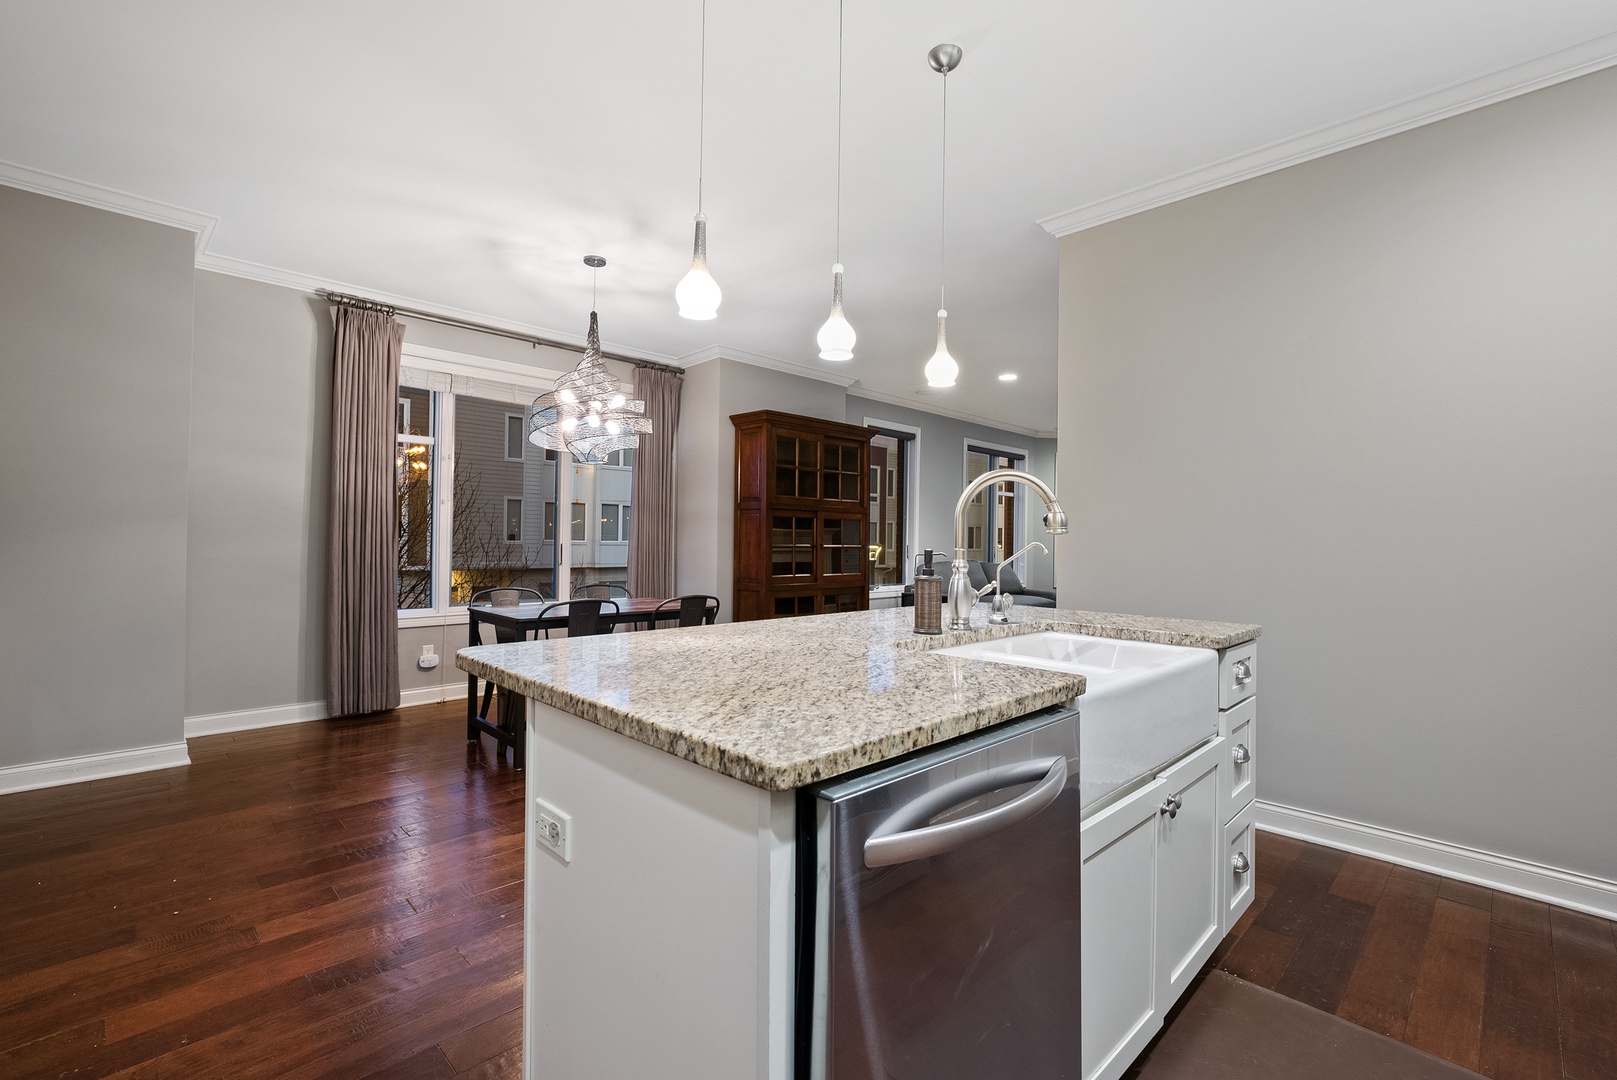 Kitchen Area Downtown Cleveland Luxury Rental Home